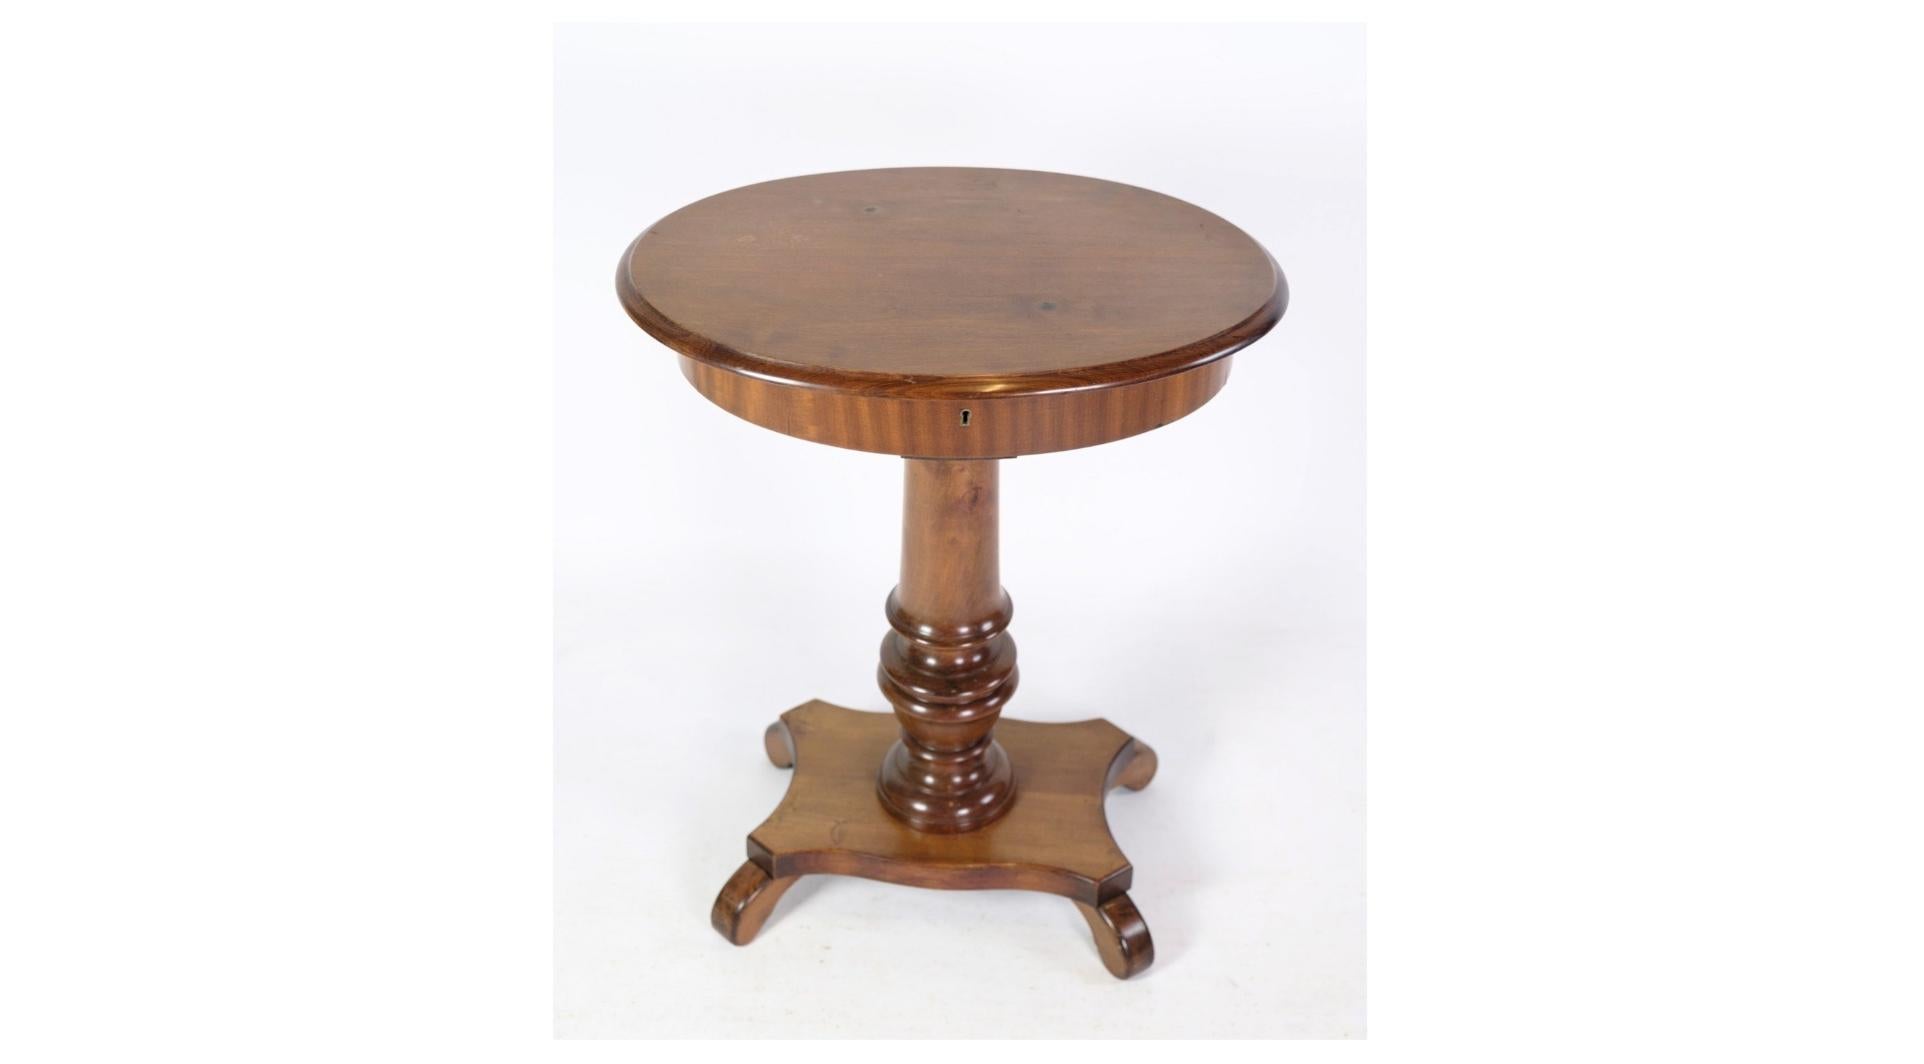 An exquisite oval sewing table/lamp table on a pillar with a mahogany sewing room, originating from the 1890s. This remarkable piece embodies the elegance and craftsmanship of the late 19th century, offering both functionality and beauty to any